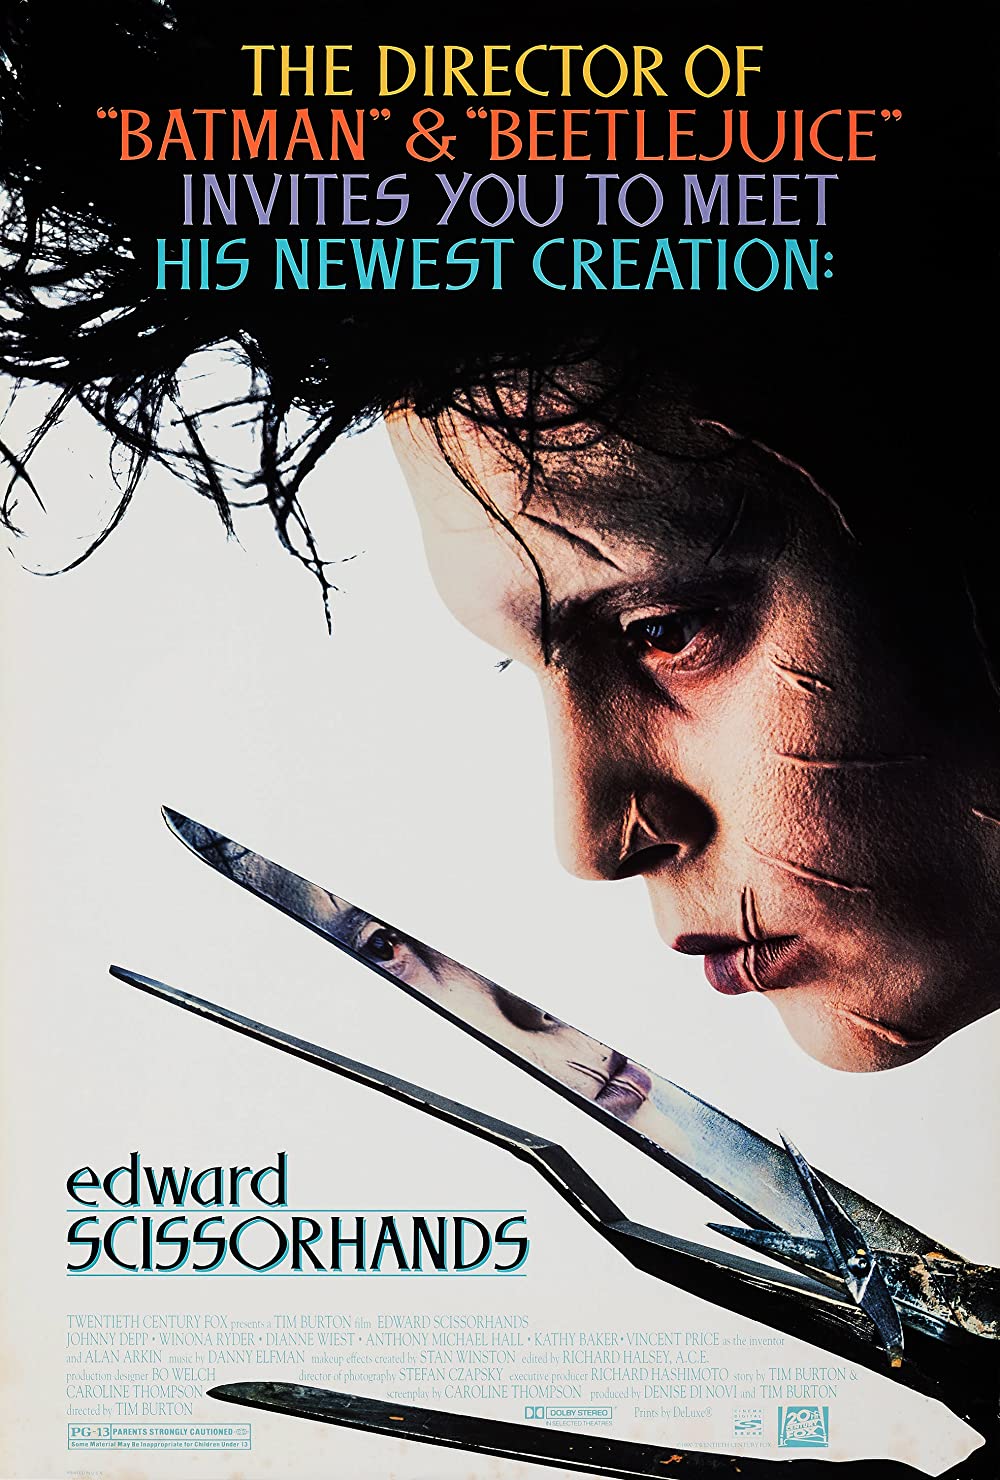 Poster for the movie Edward Scissorhands